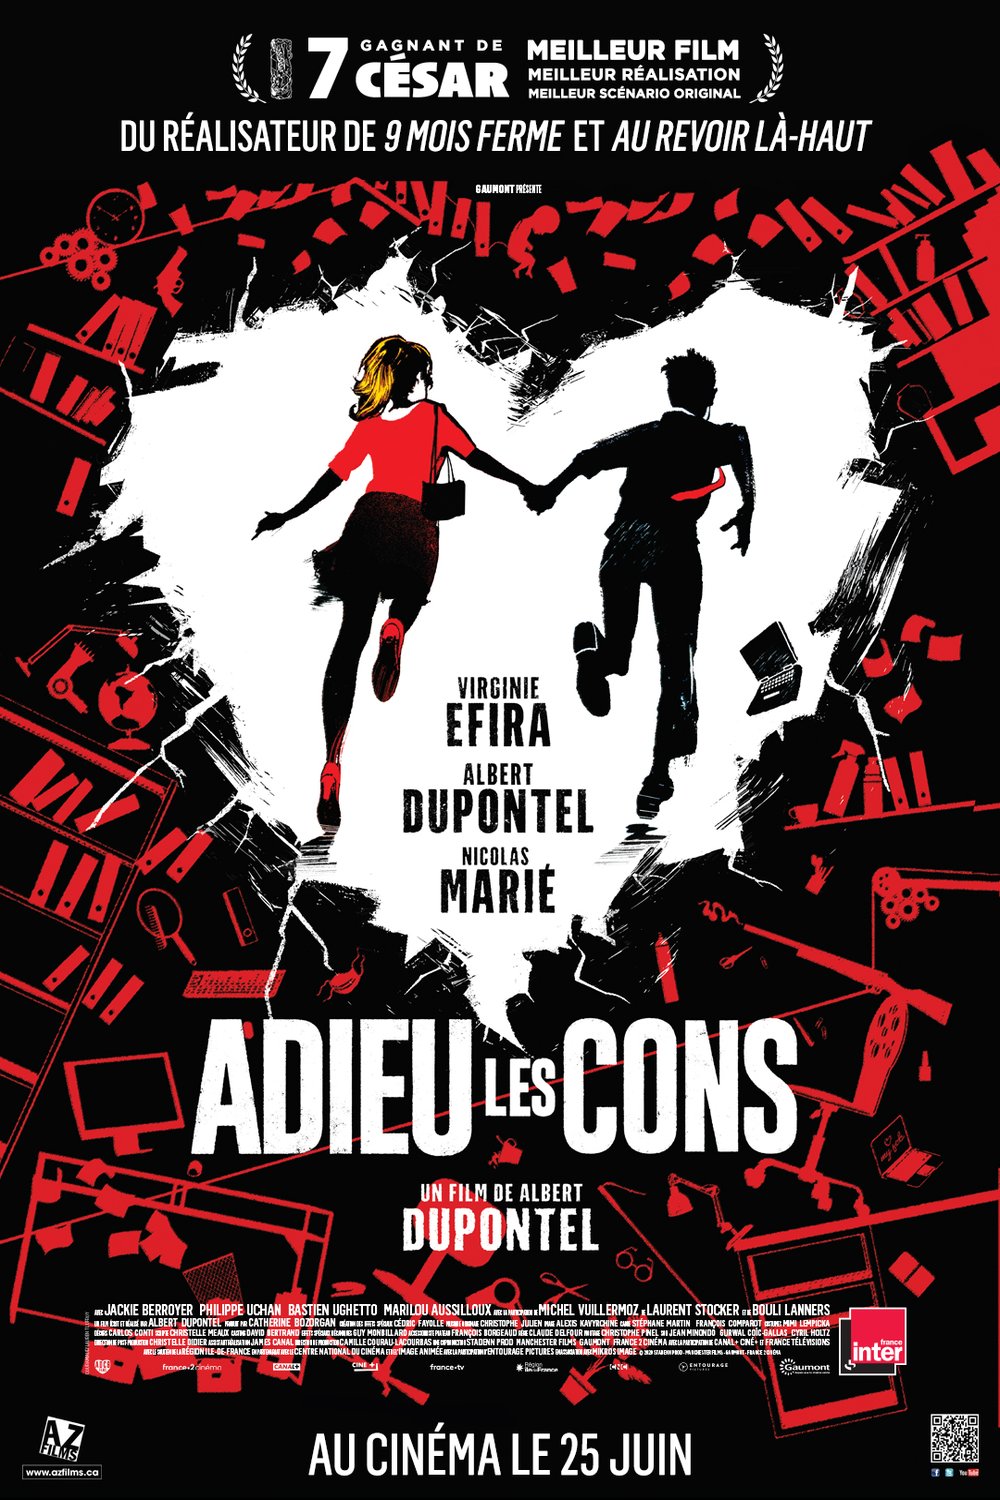 Poster of the movie Adieu les cons